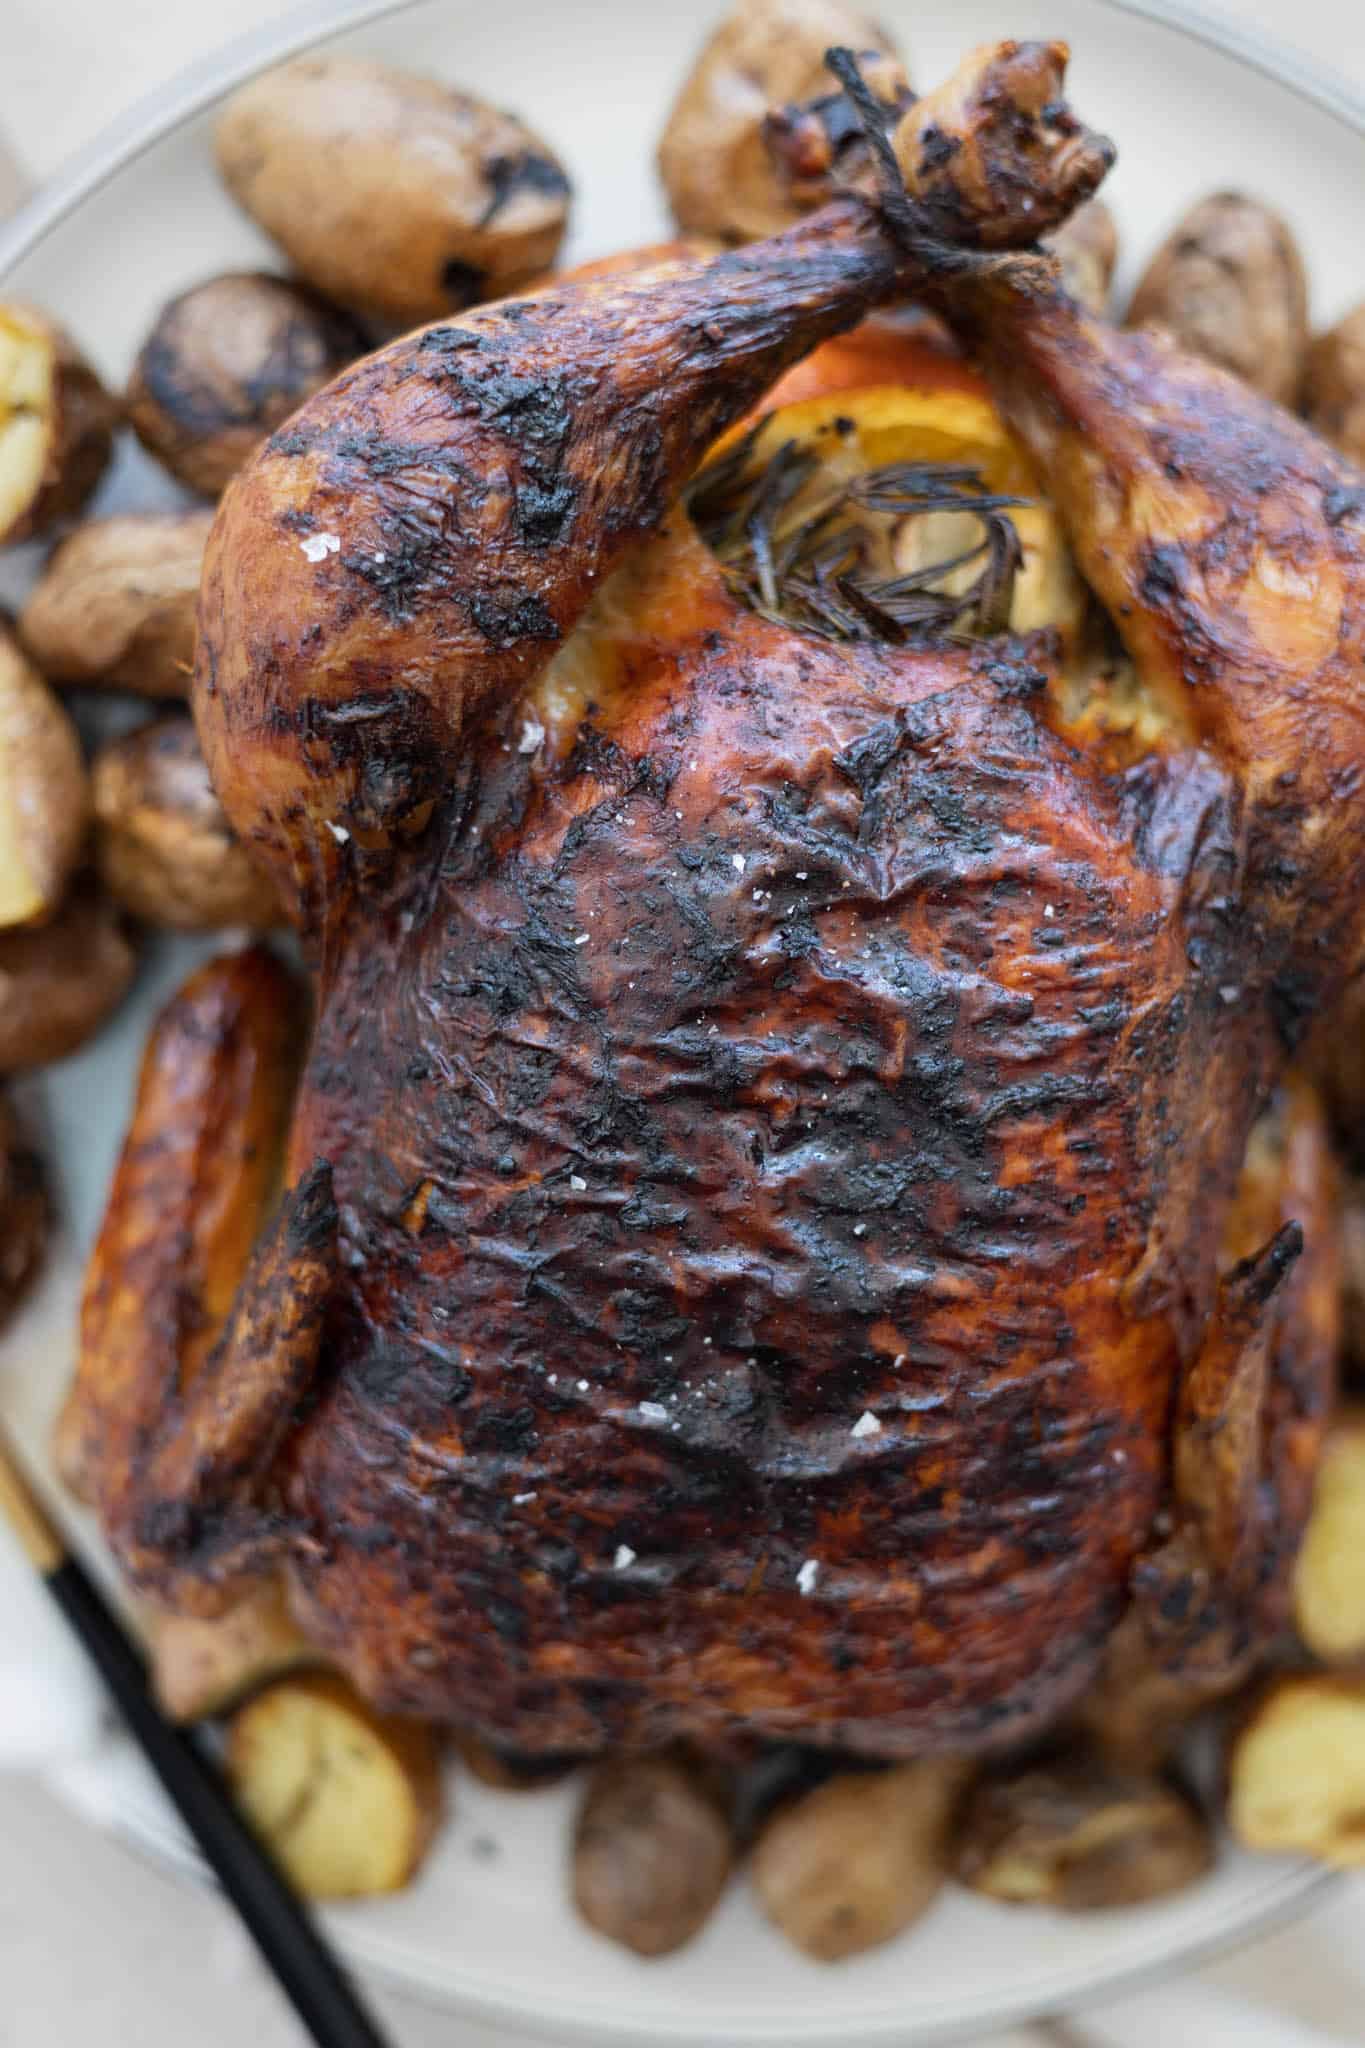 A closeup of the crispy skin of the bird on the serving platter. 